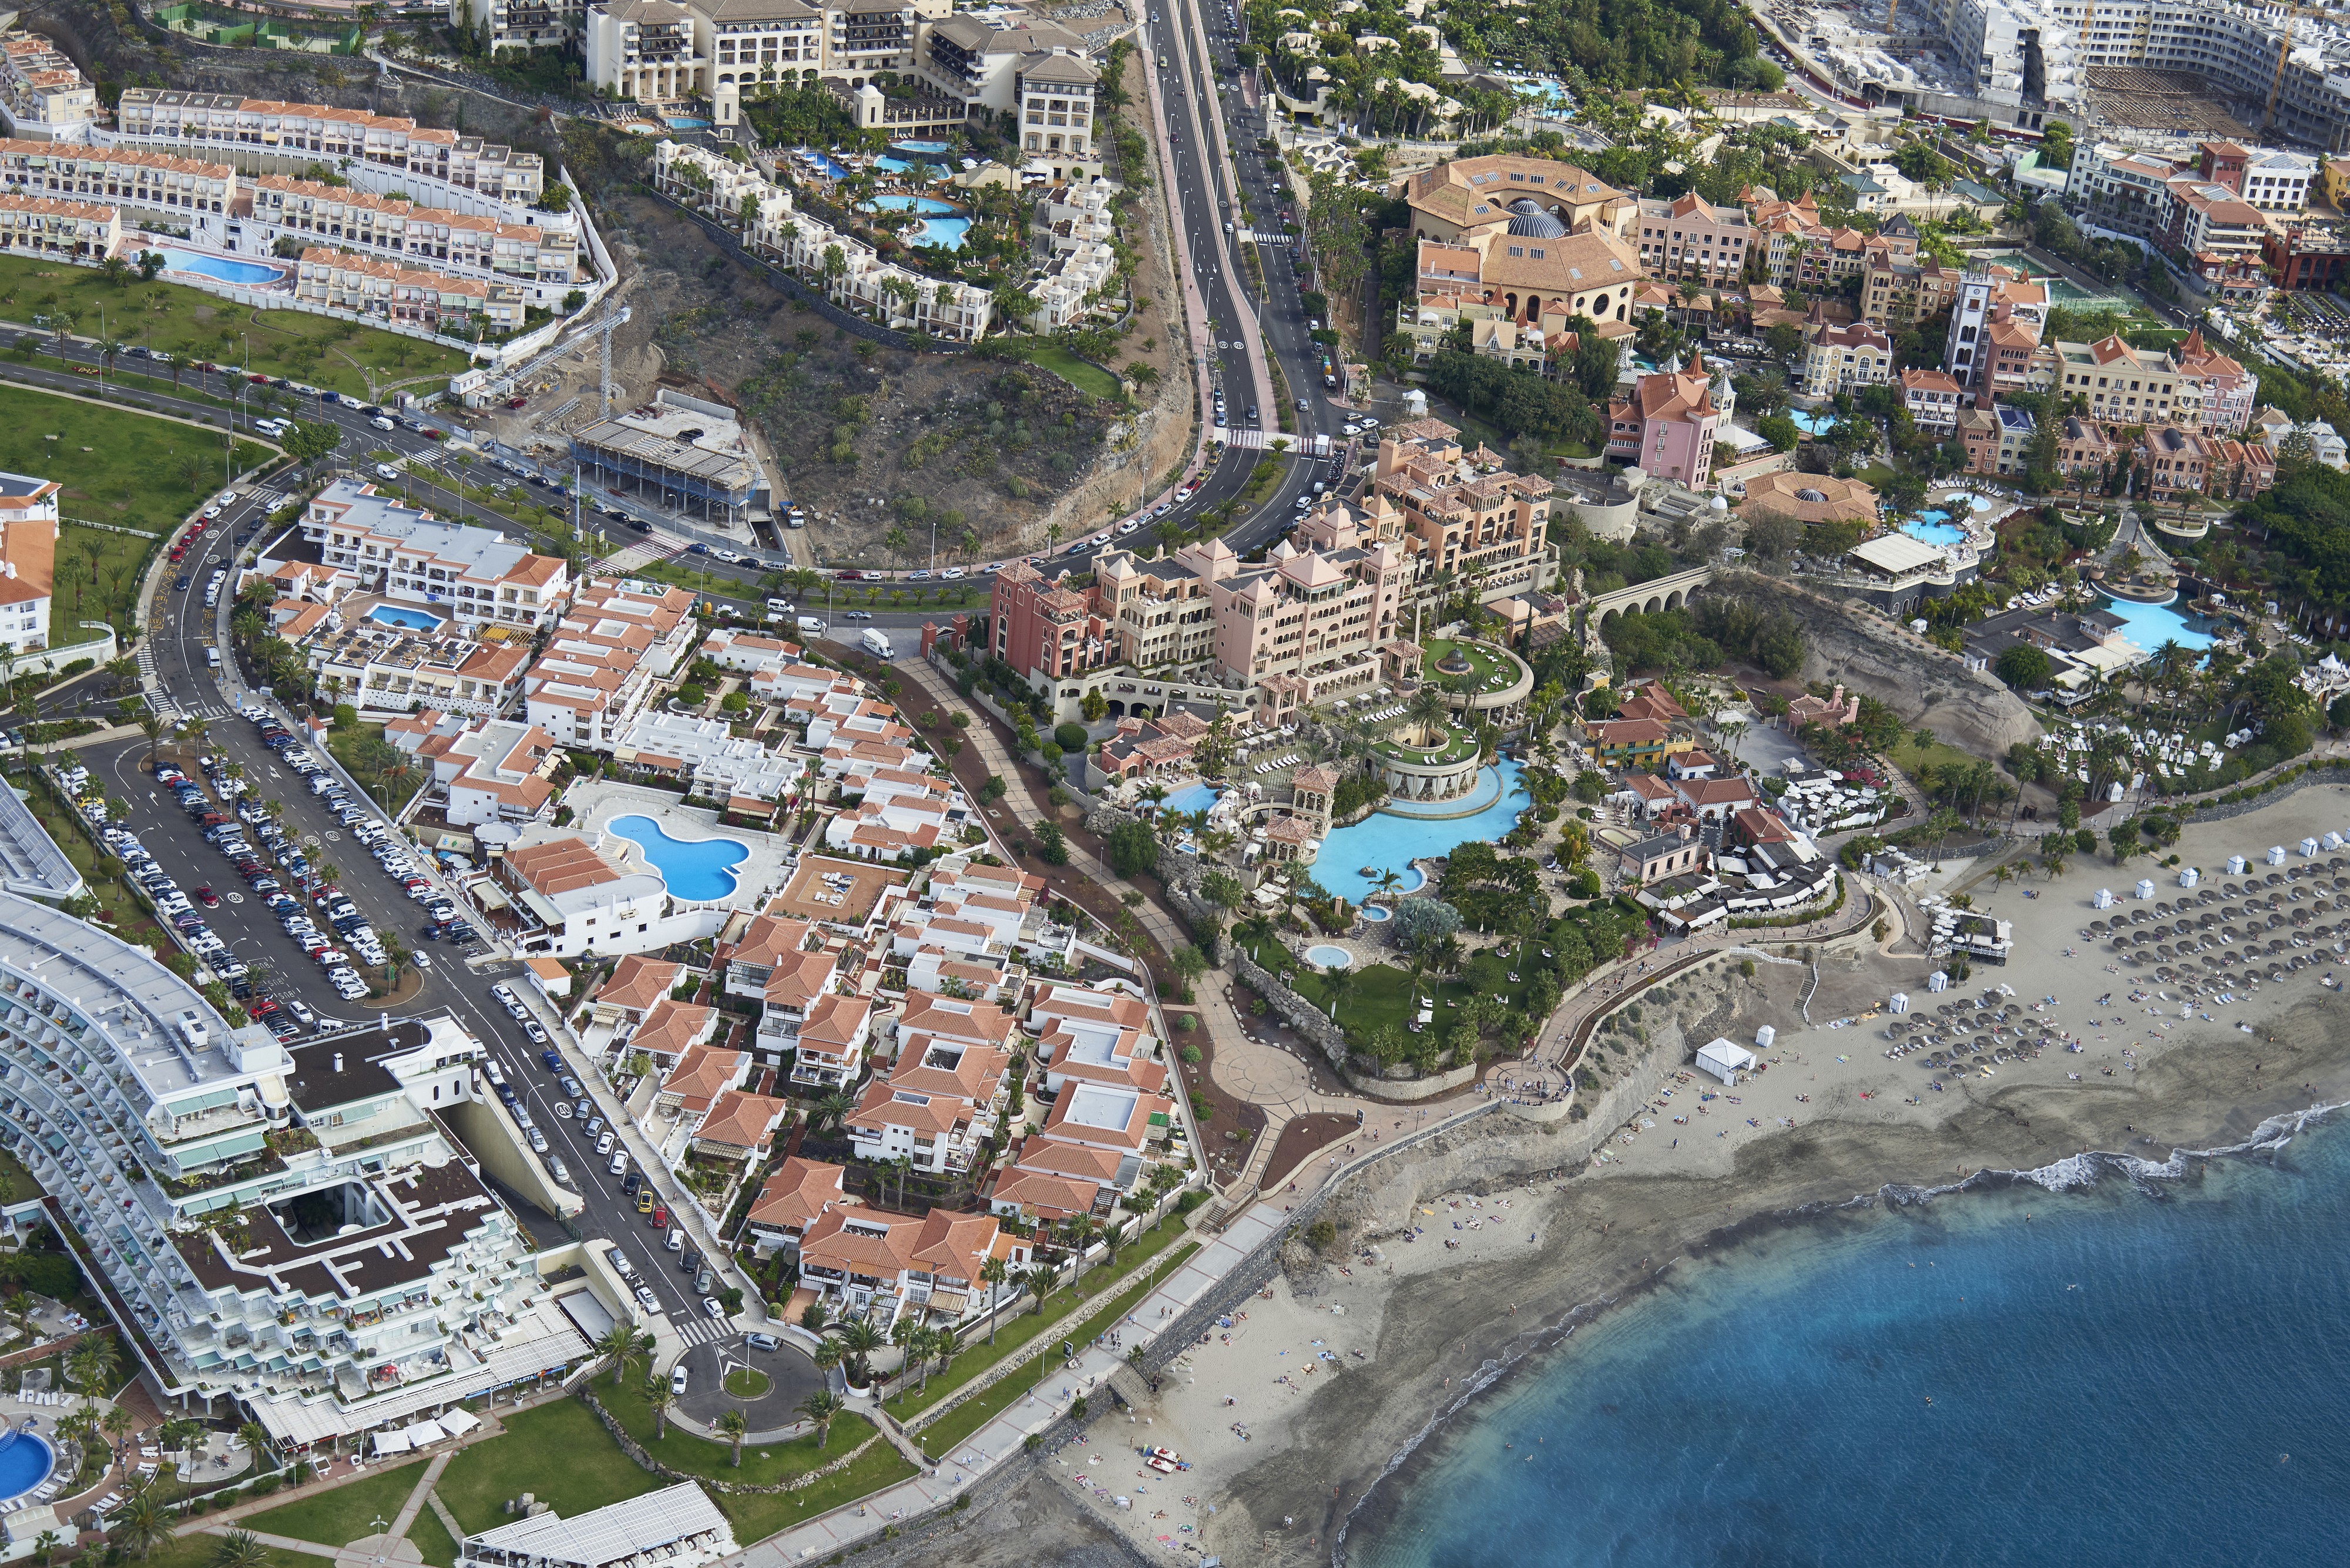 A0407 Tenerife, Hotels in Adeje aerial view